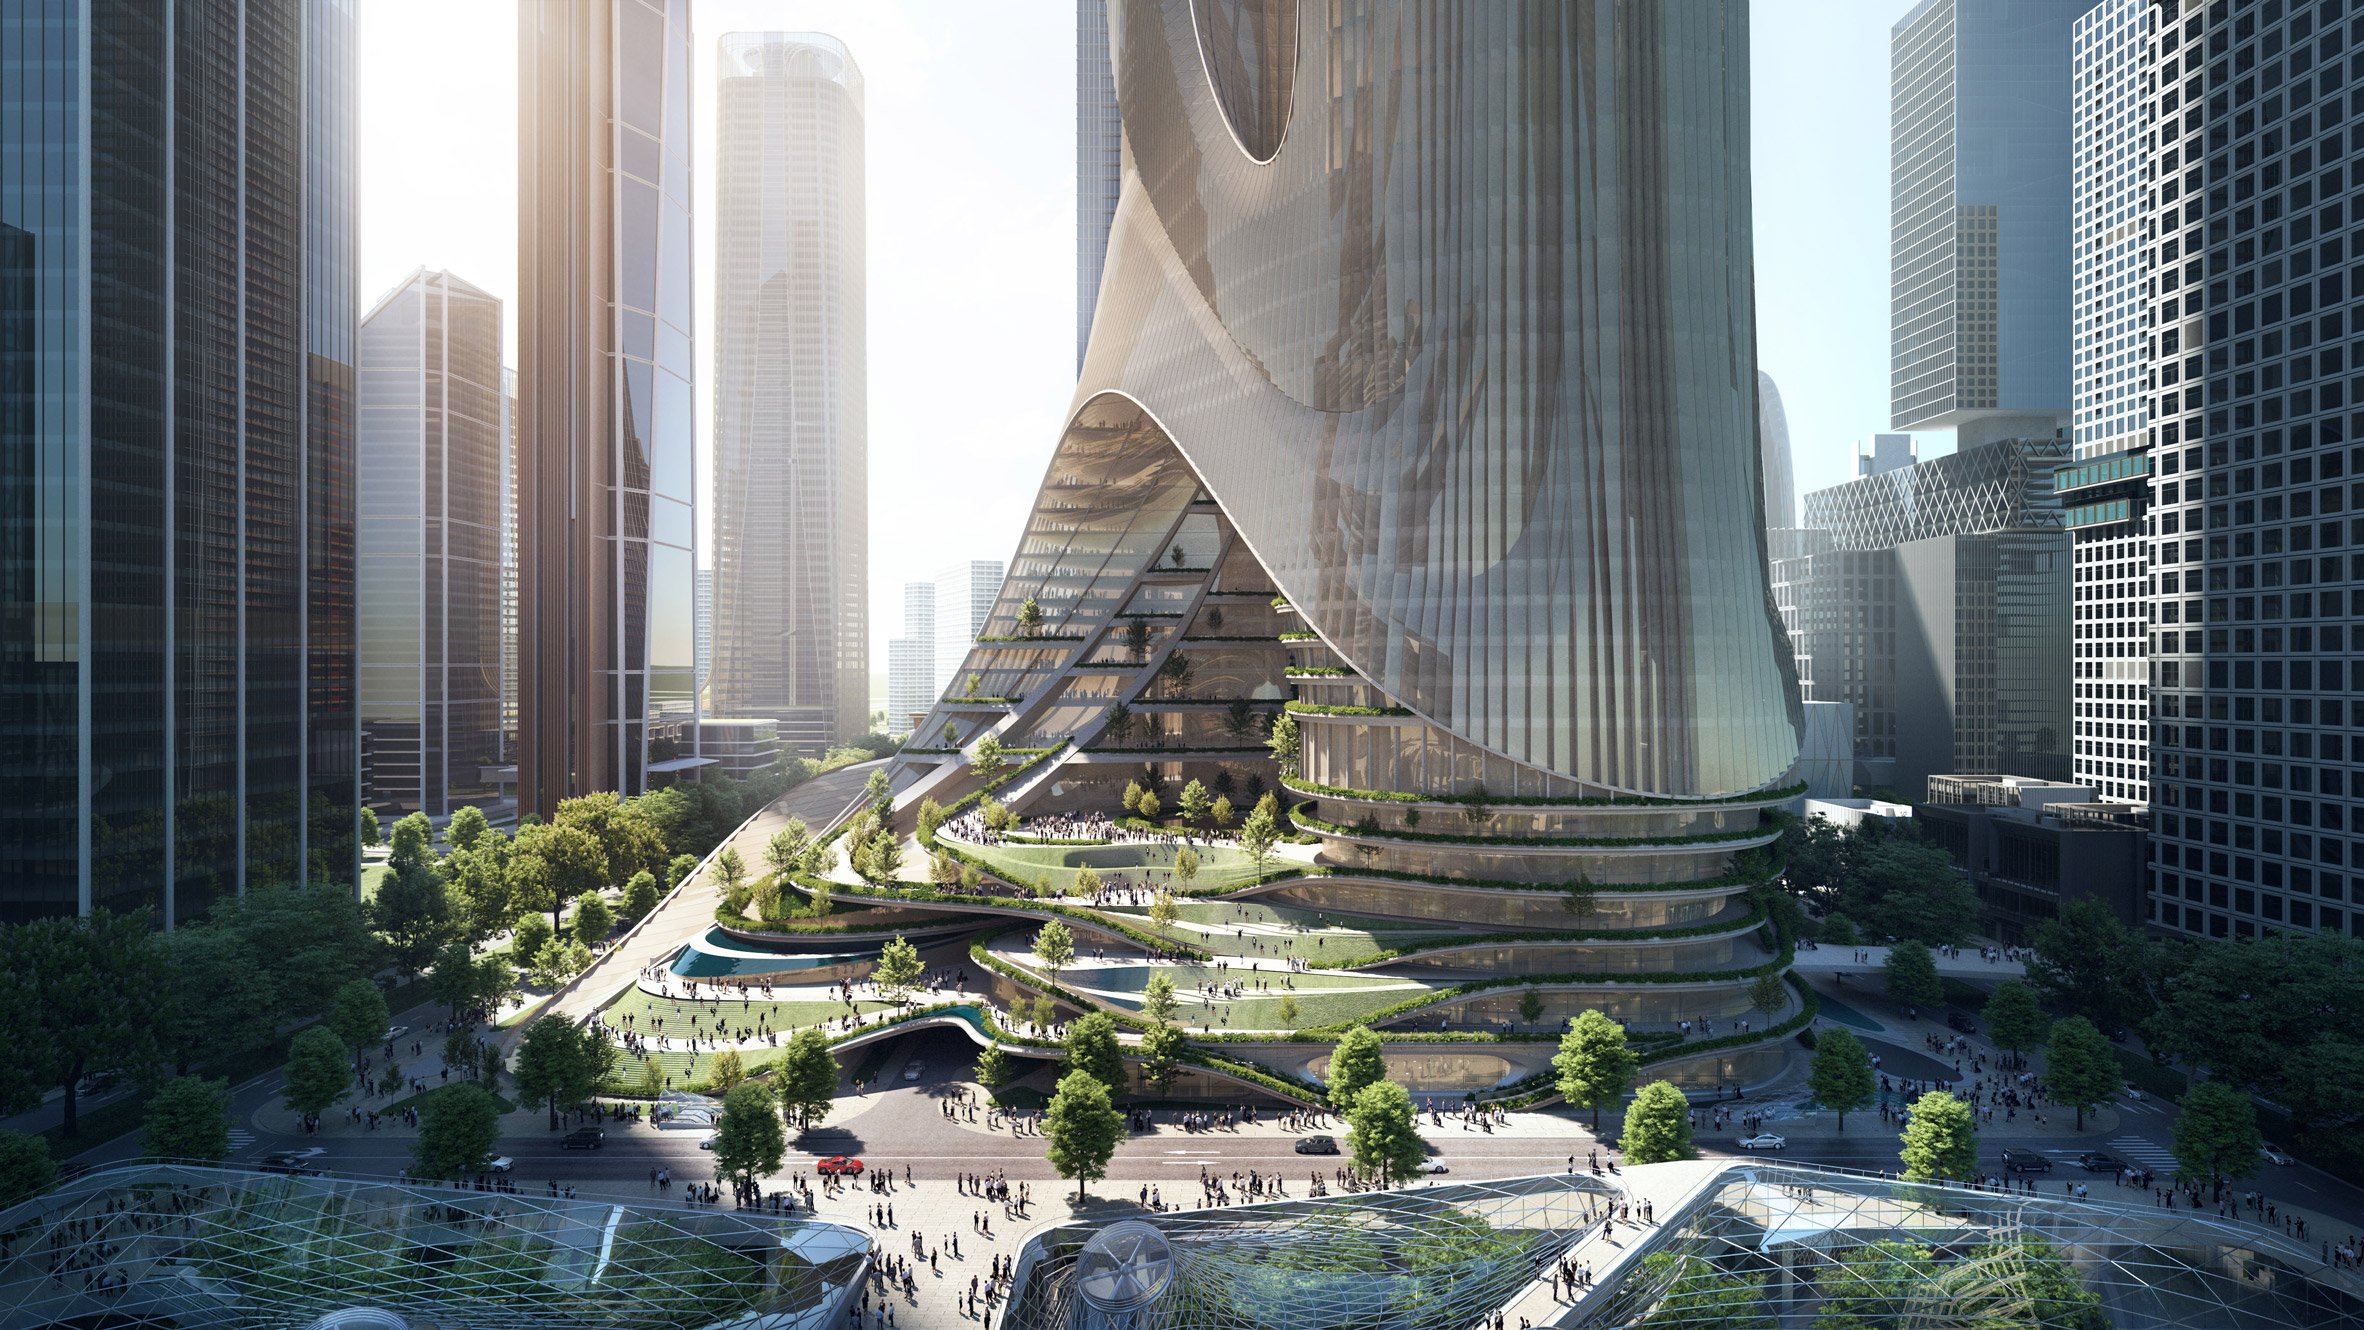 A visual of the Tower C terraces by Zaha Hadid Architects in Shenzhen